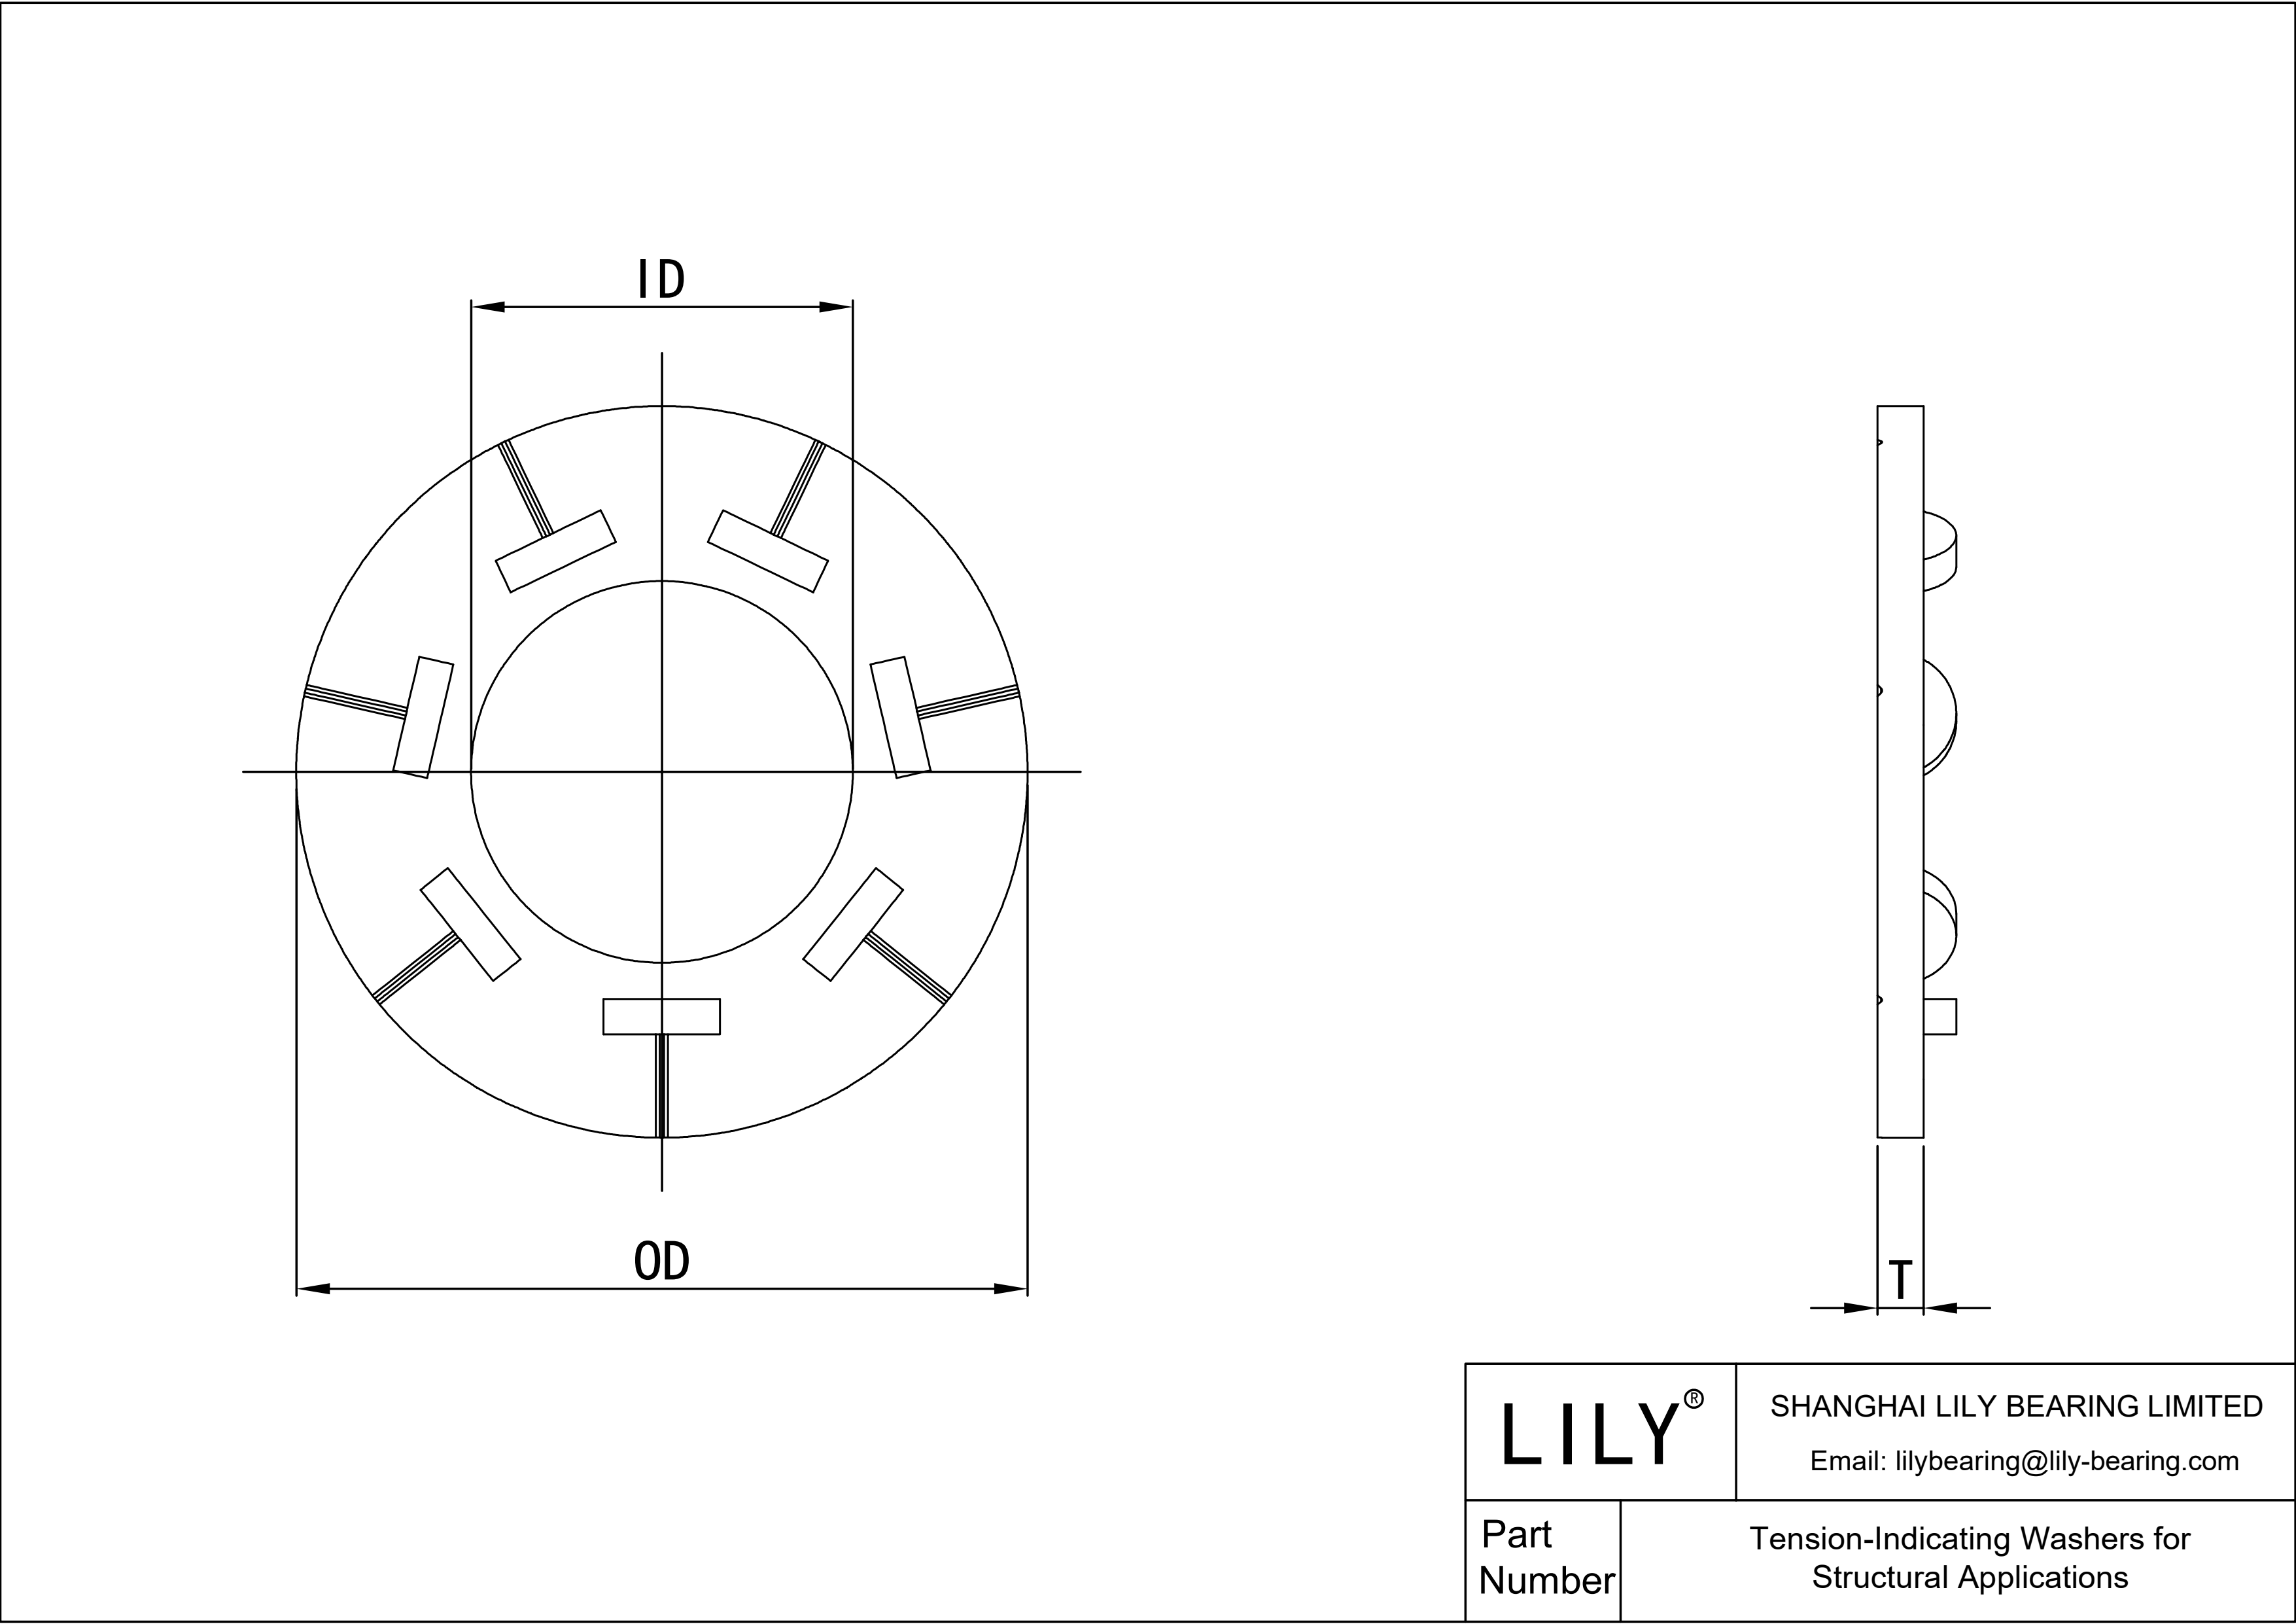 JFDEIABCG Tension-Indicating Washers for Structural Applications cad drawing